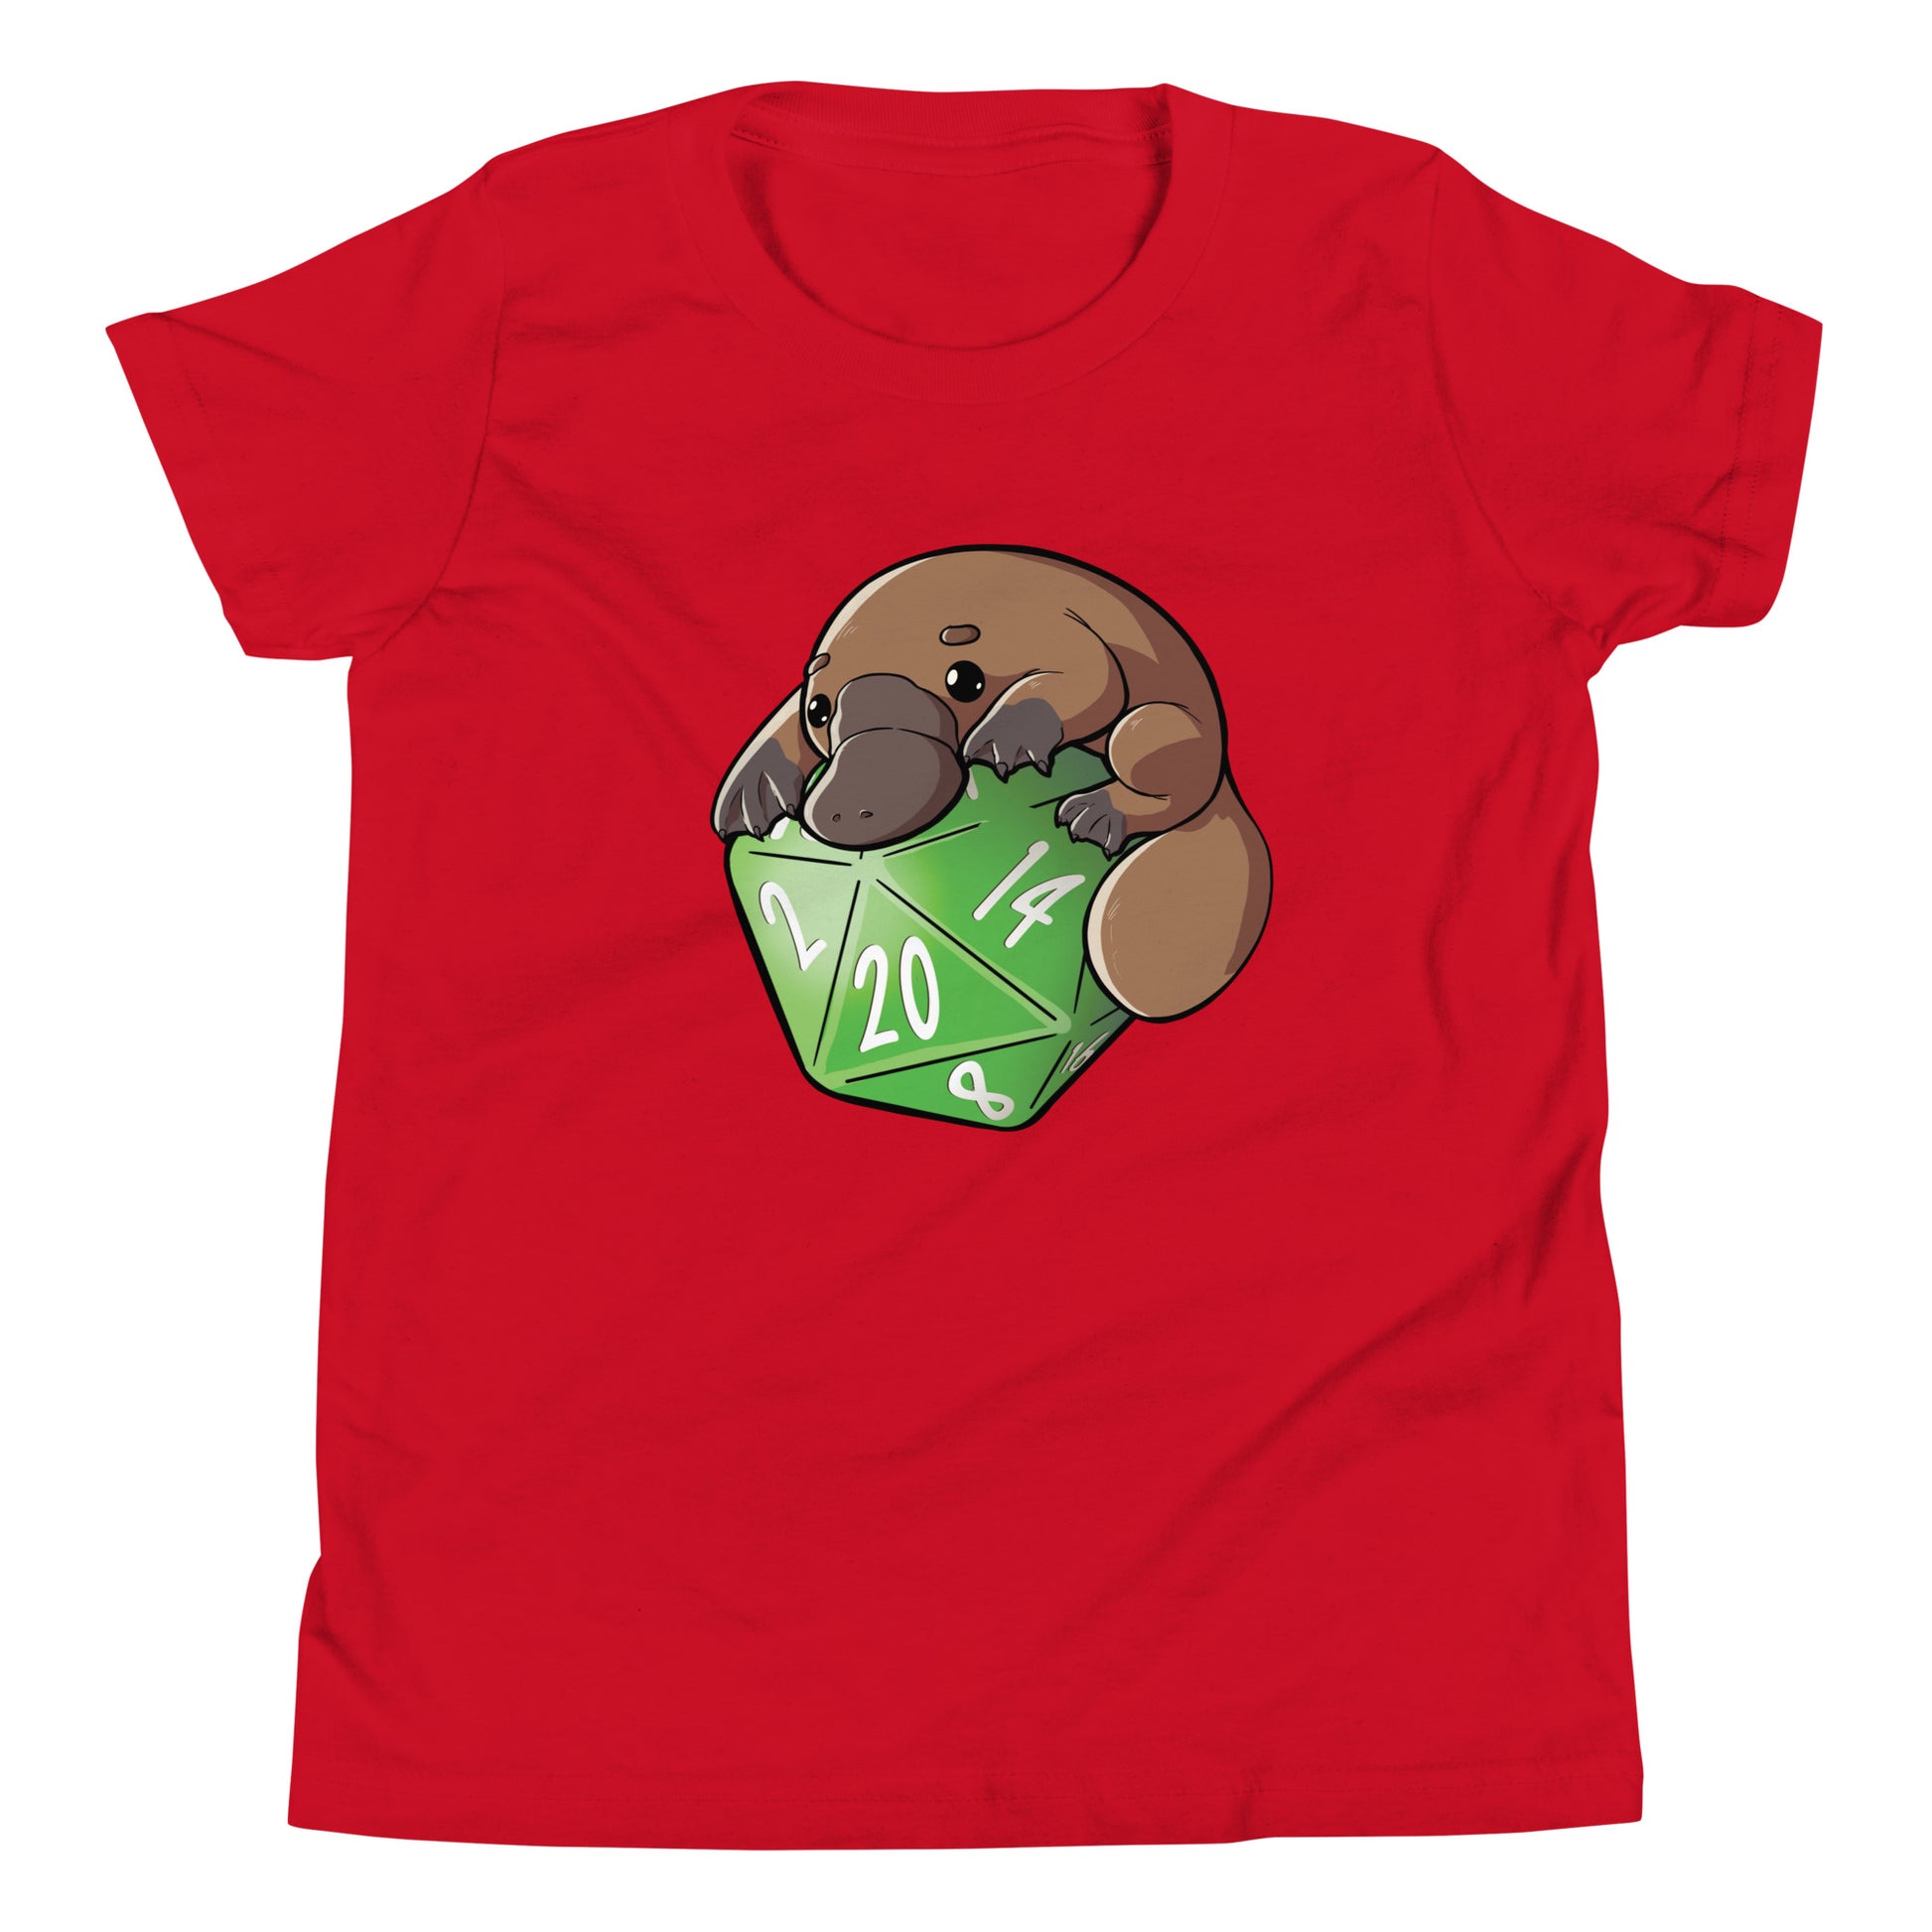 D20 Platypus Youth Short Sleeve T-Shirt  Level 1 Gamers Red S 